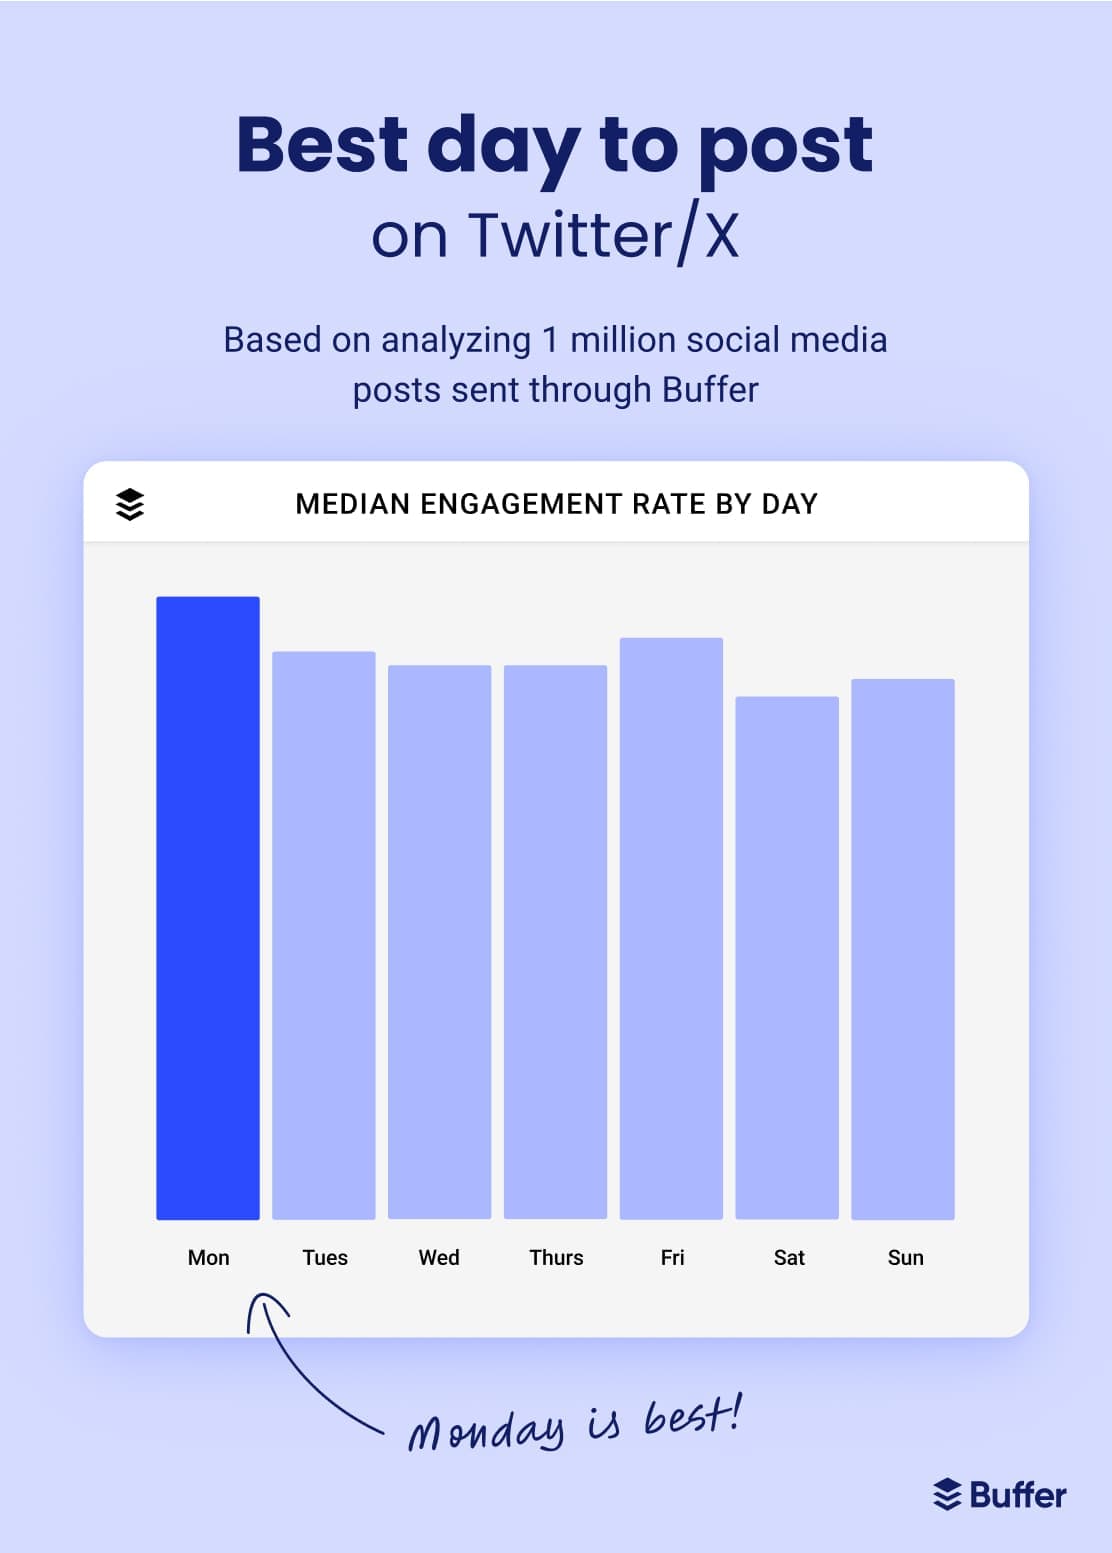 Bar chart of the best day to post on X/Twitter based on analyzing 1 million social media posts sent through Buffer displaying Monday as the best day to post, followed by Friday, Tuesday, Wednesday, Thursday, Sunday, and lastly Saturday.